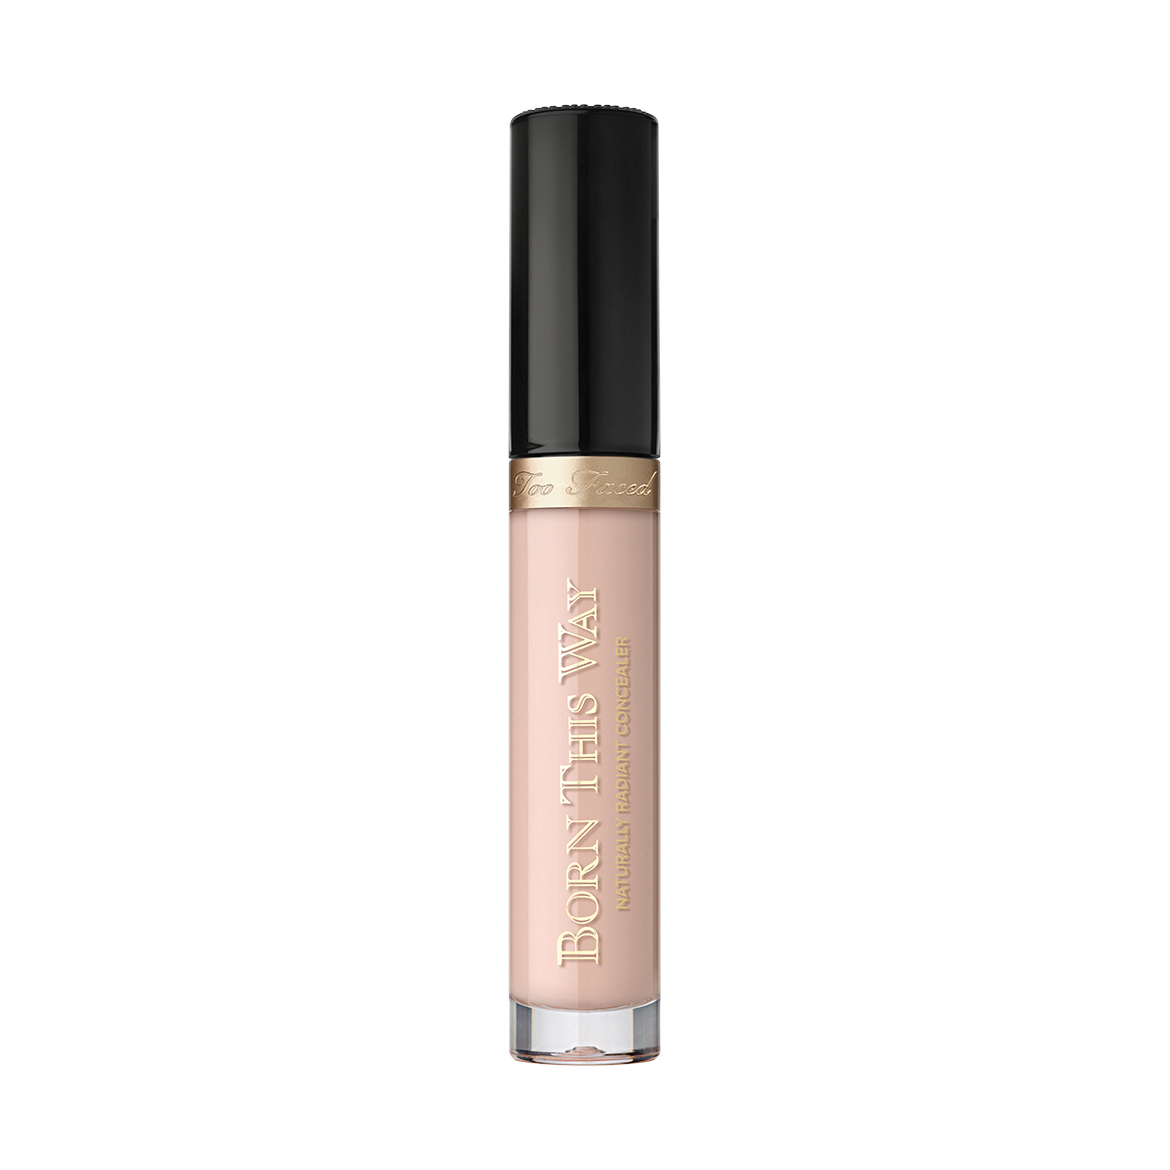 Too faced born this way concealer in colour FAIR